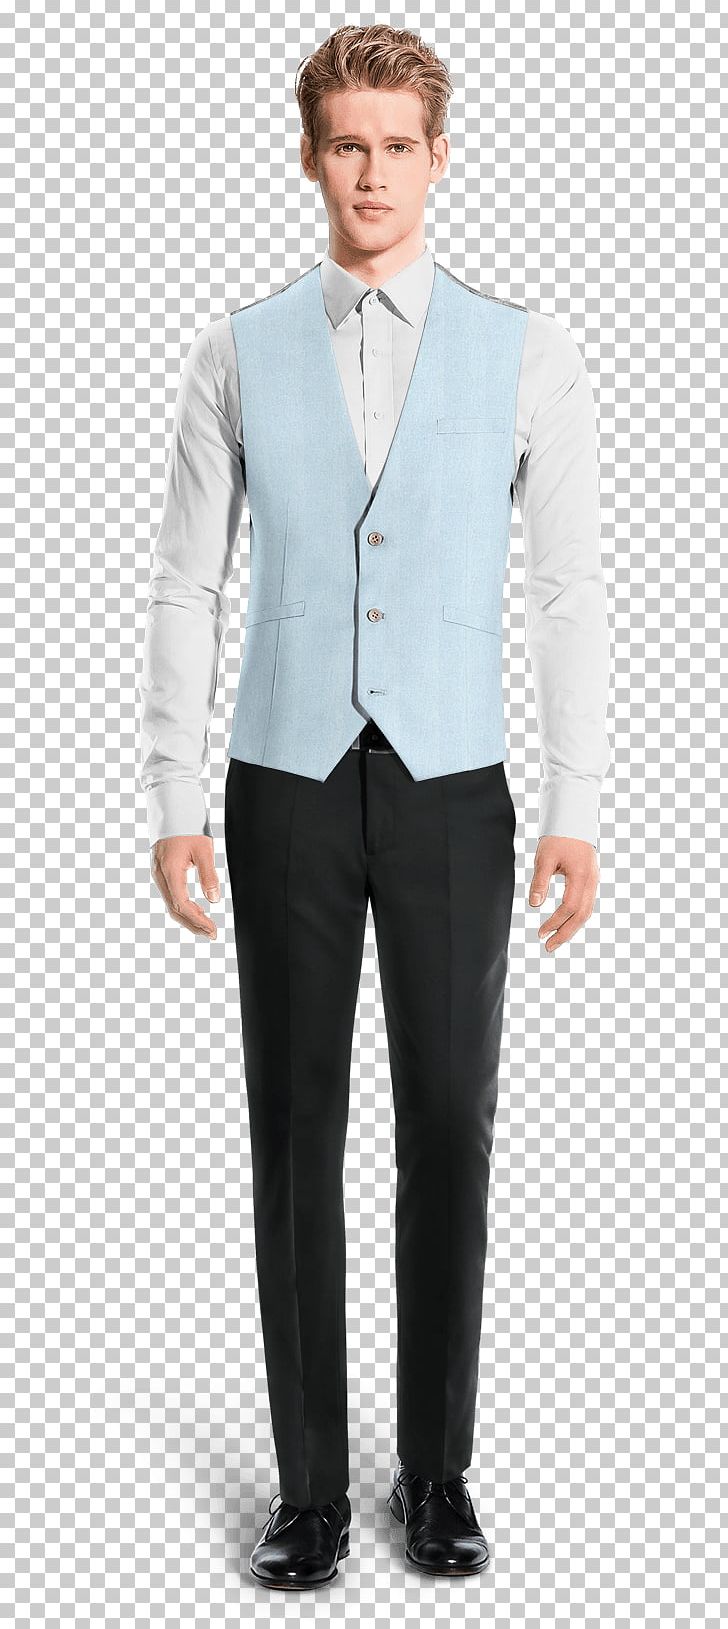 Tweed Suit Pants Wool Chino Cloth PNG, Clipart, Blazer, Blue, Businessperson, Chino Cloth, Clothing Free PNG Download